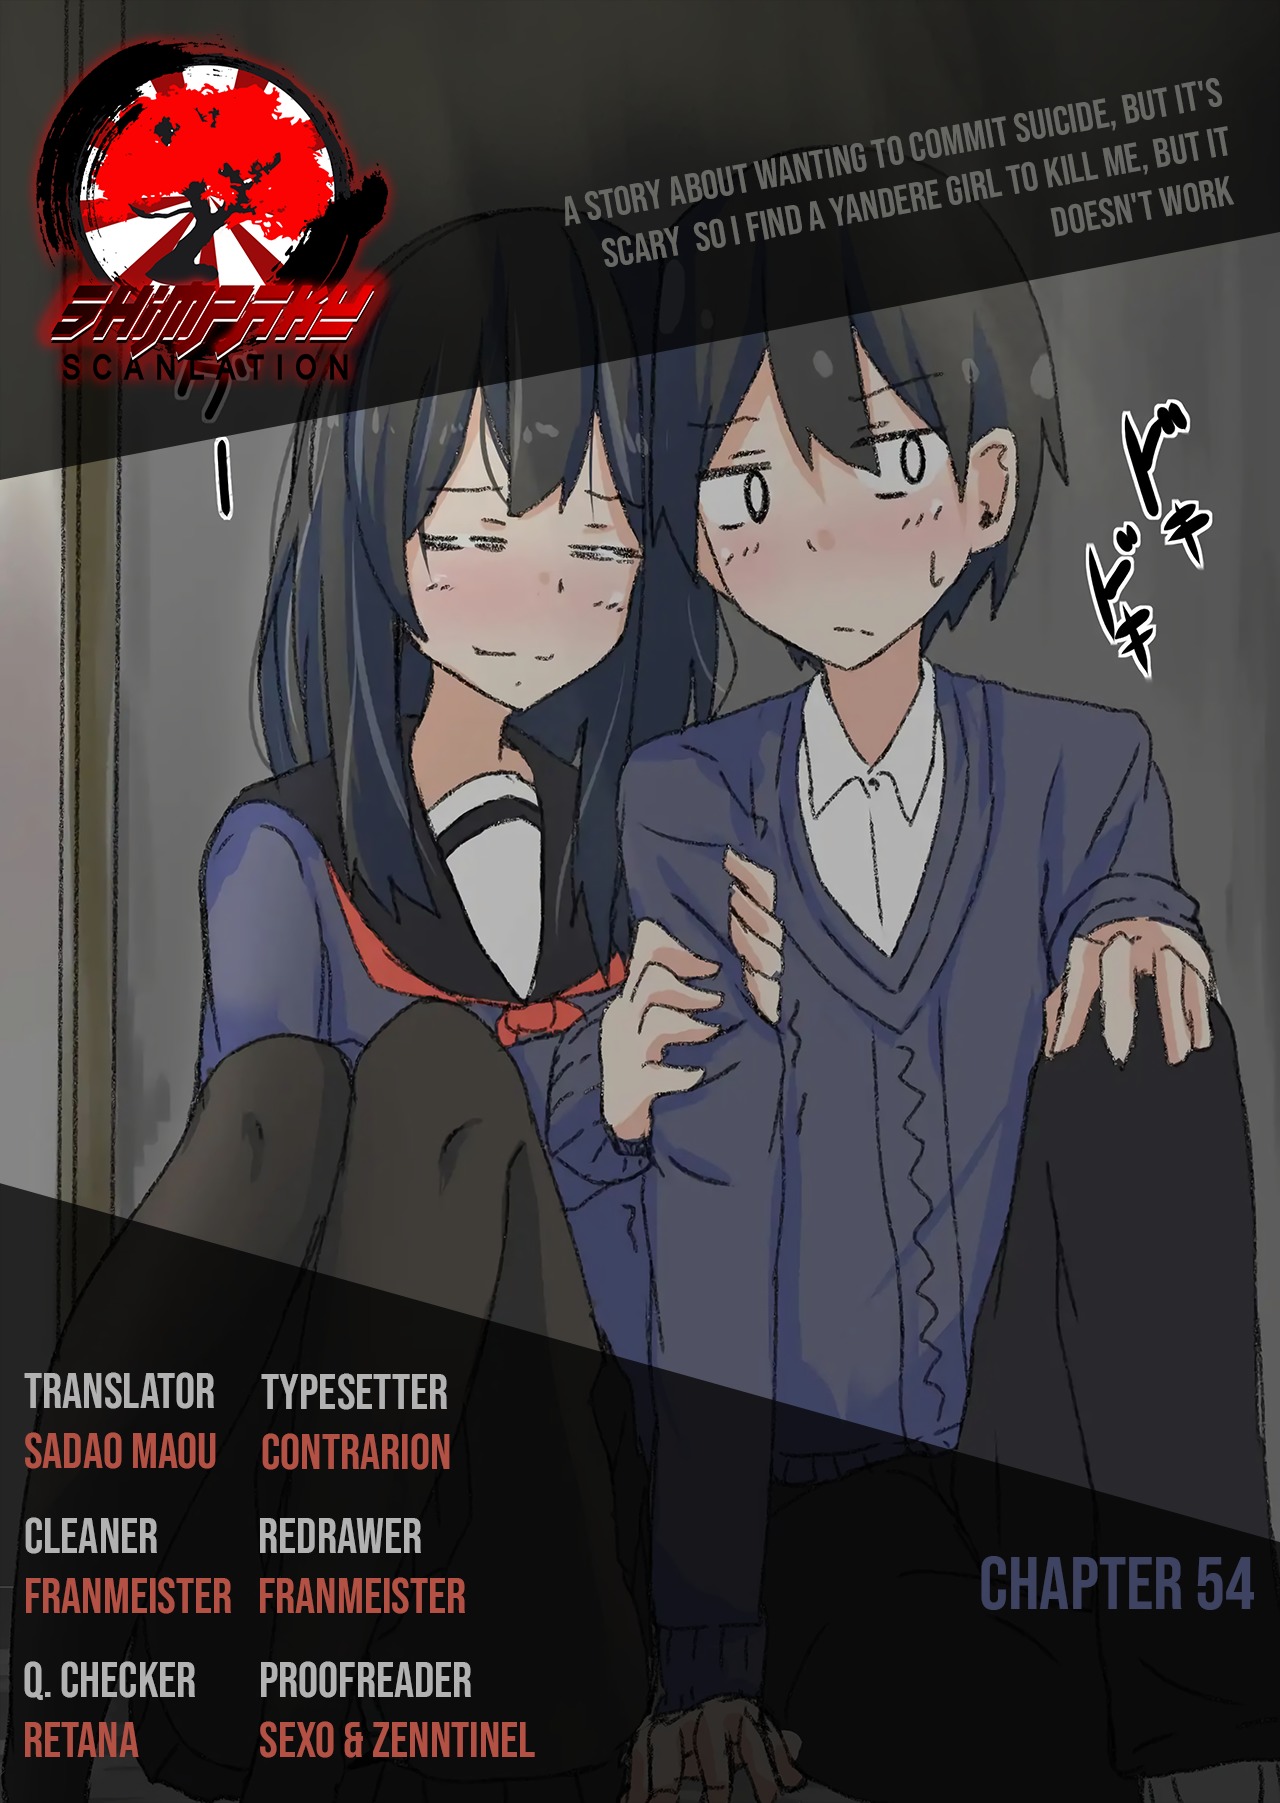 A Story About Wanting To Commit Suicide, But It's Scary So I Find A Yandere Girl To Kill Me, But It Doesn't Work ch.54